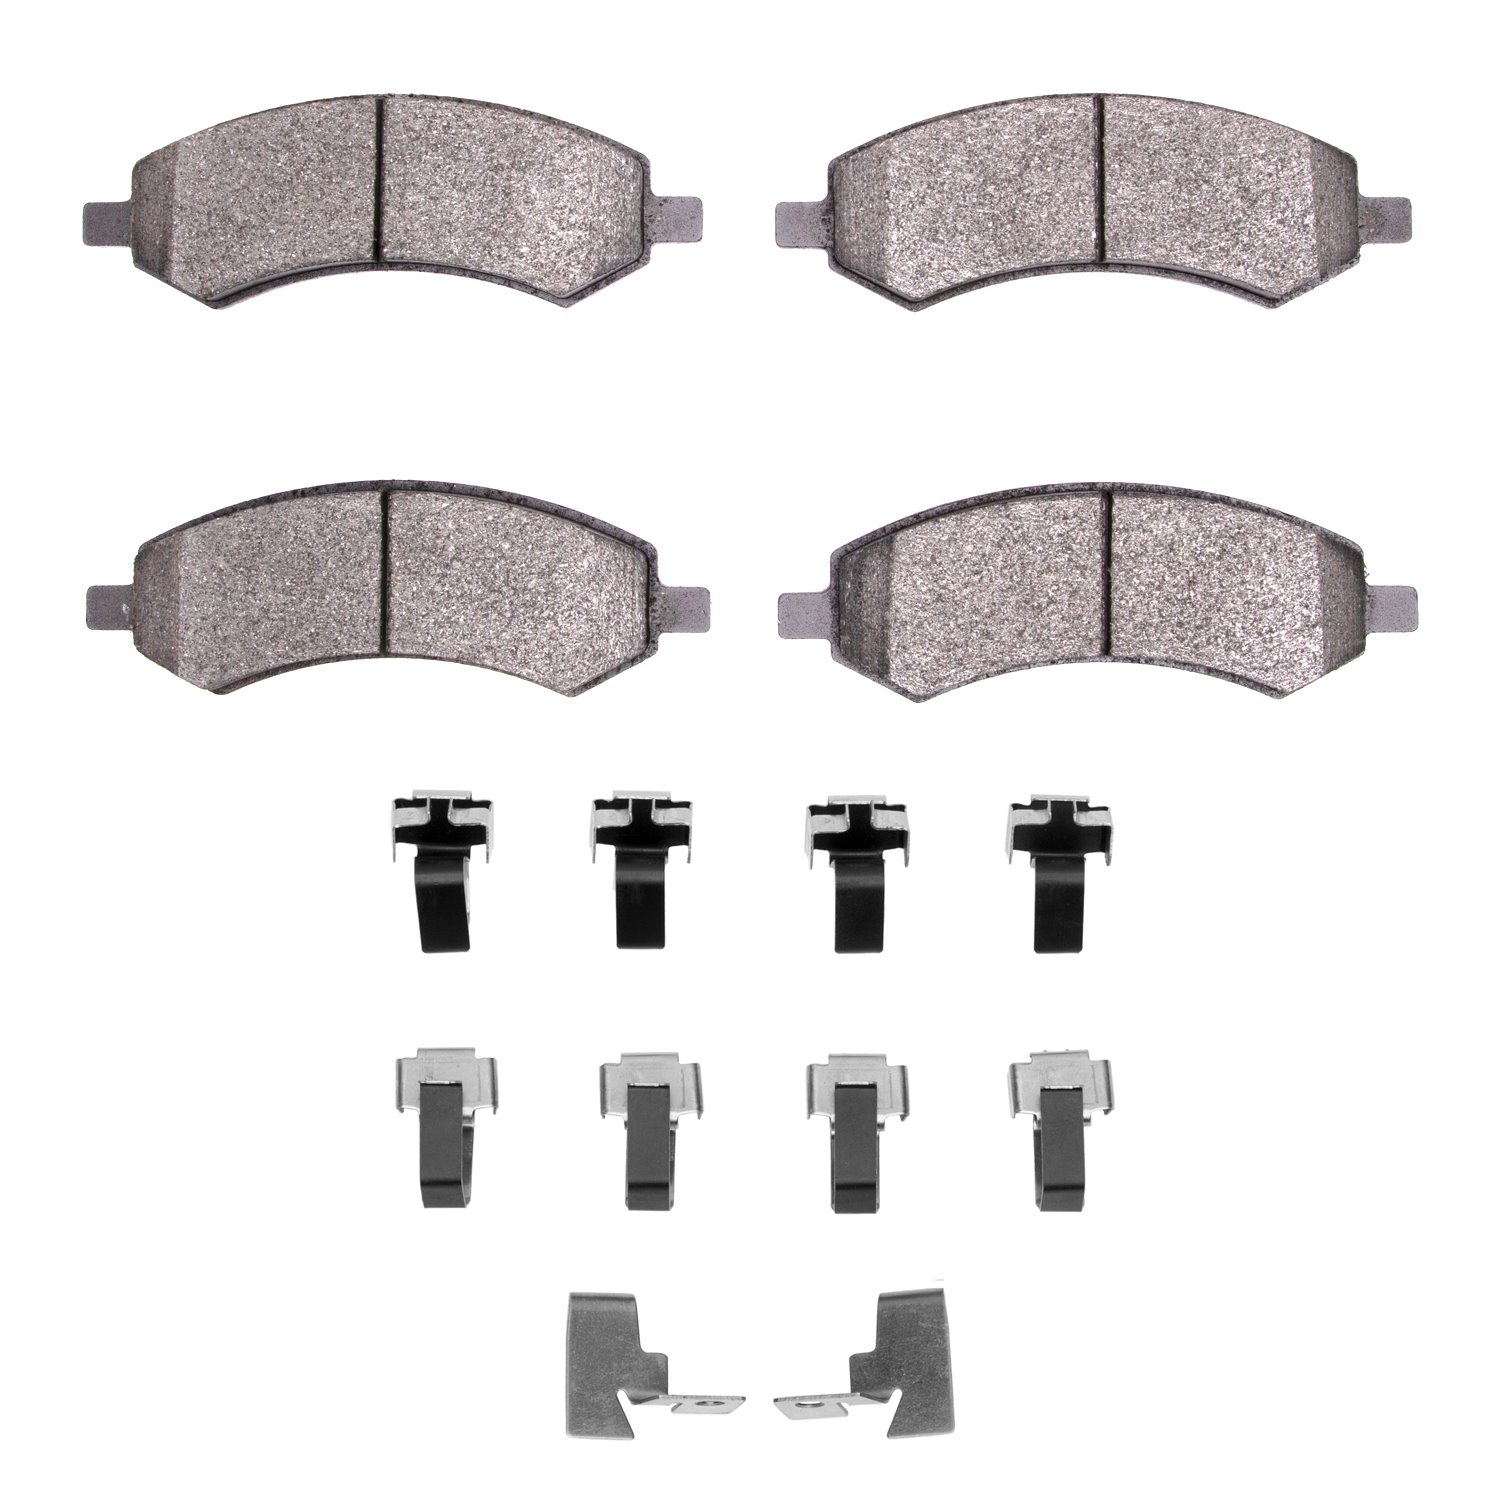 1214-1084-01 Heavy-Duty Brake Pads & Hardware Kit, Fits Select Multiple Makes/Models, Position: Front